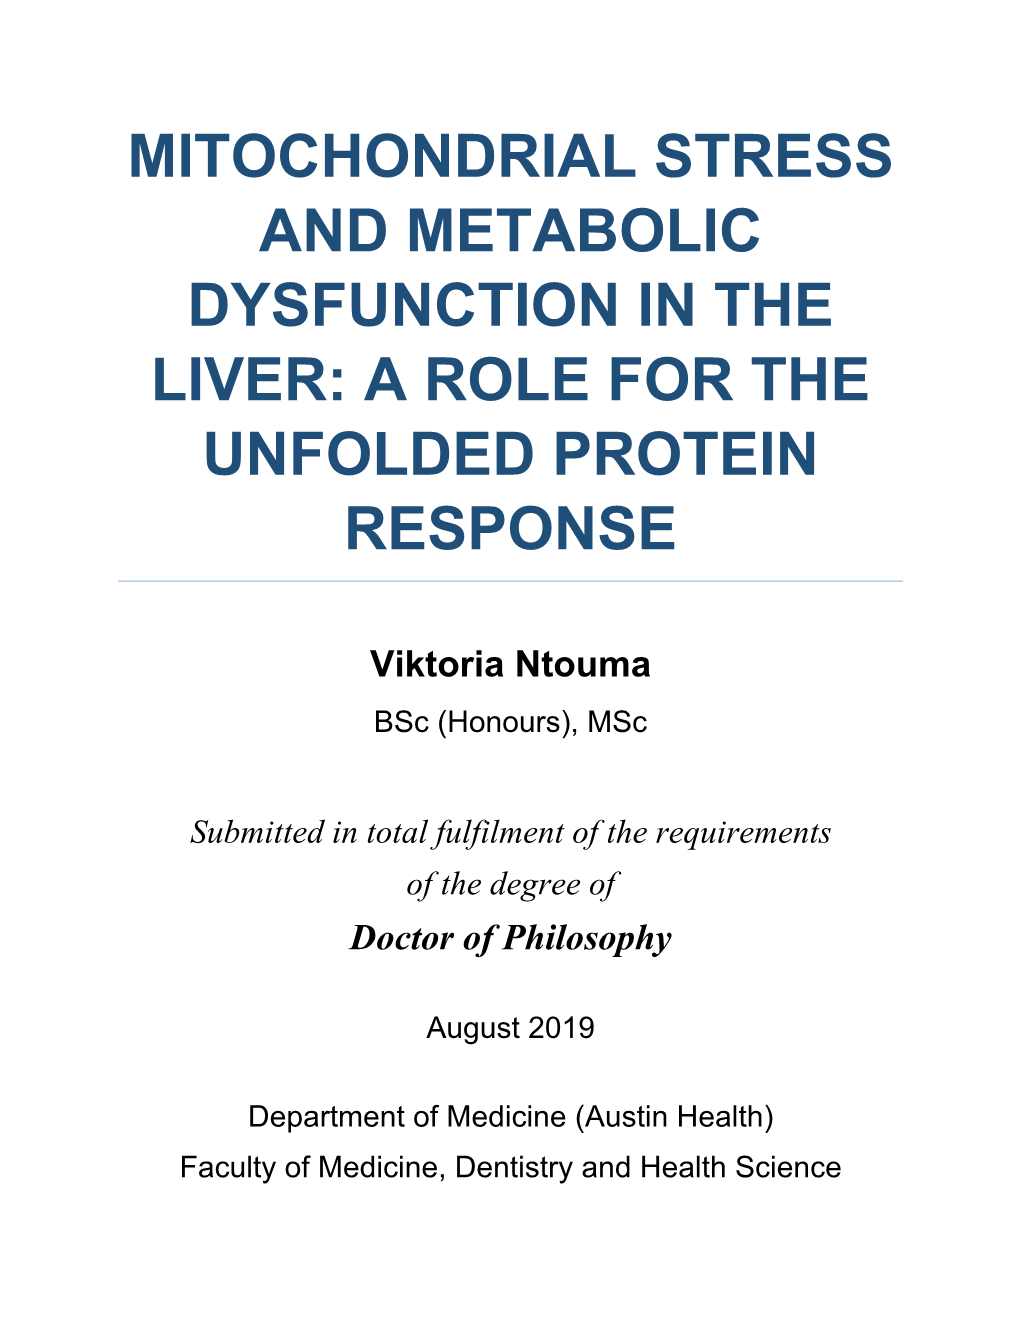 Mitochondrial Stress and Metabolic Dysfunction in the Liver: a Role for the Unfolded Protein